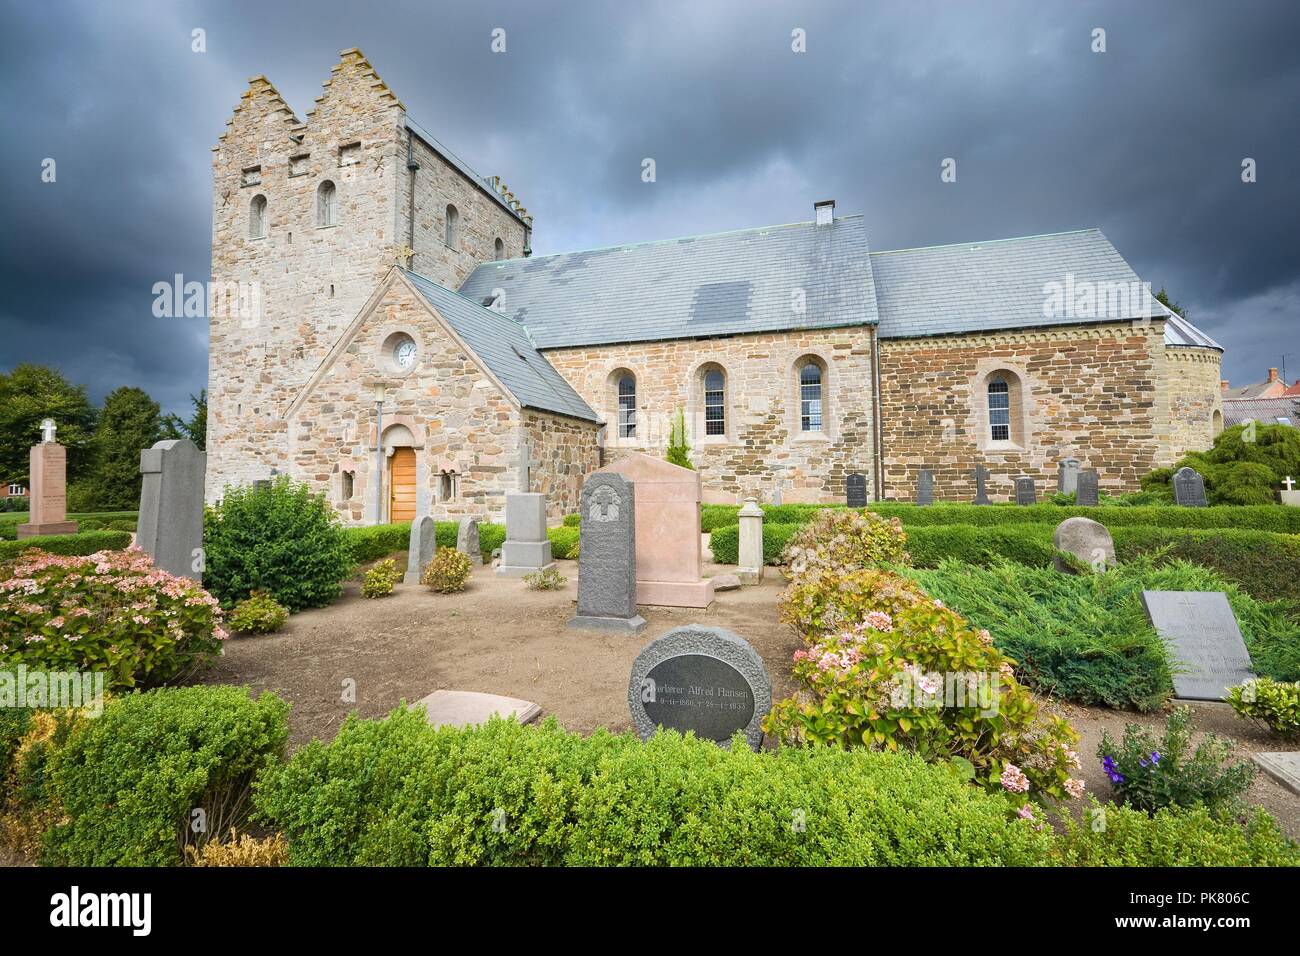 AAKIRKEBY, DENMARK - AUGUST 19, 2018: Aa church against cloudy sky. It is the biggest and oldest church on the Bornholm island. The church was constru Stock Photo